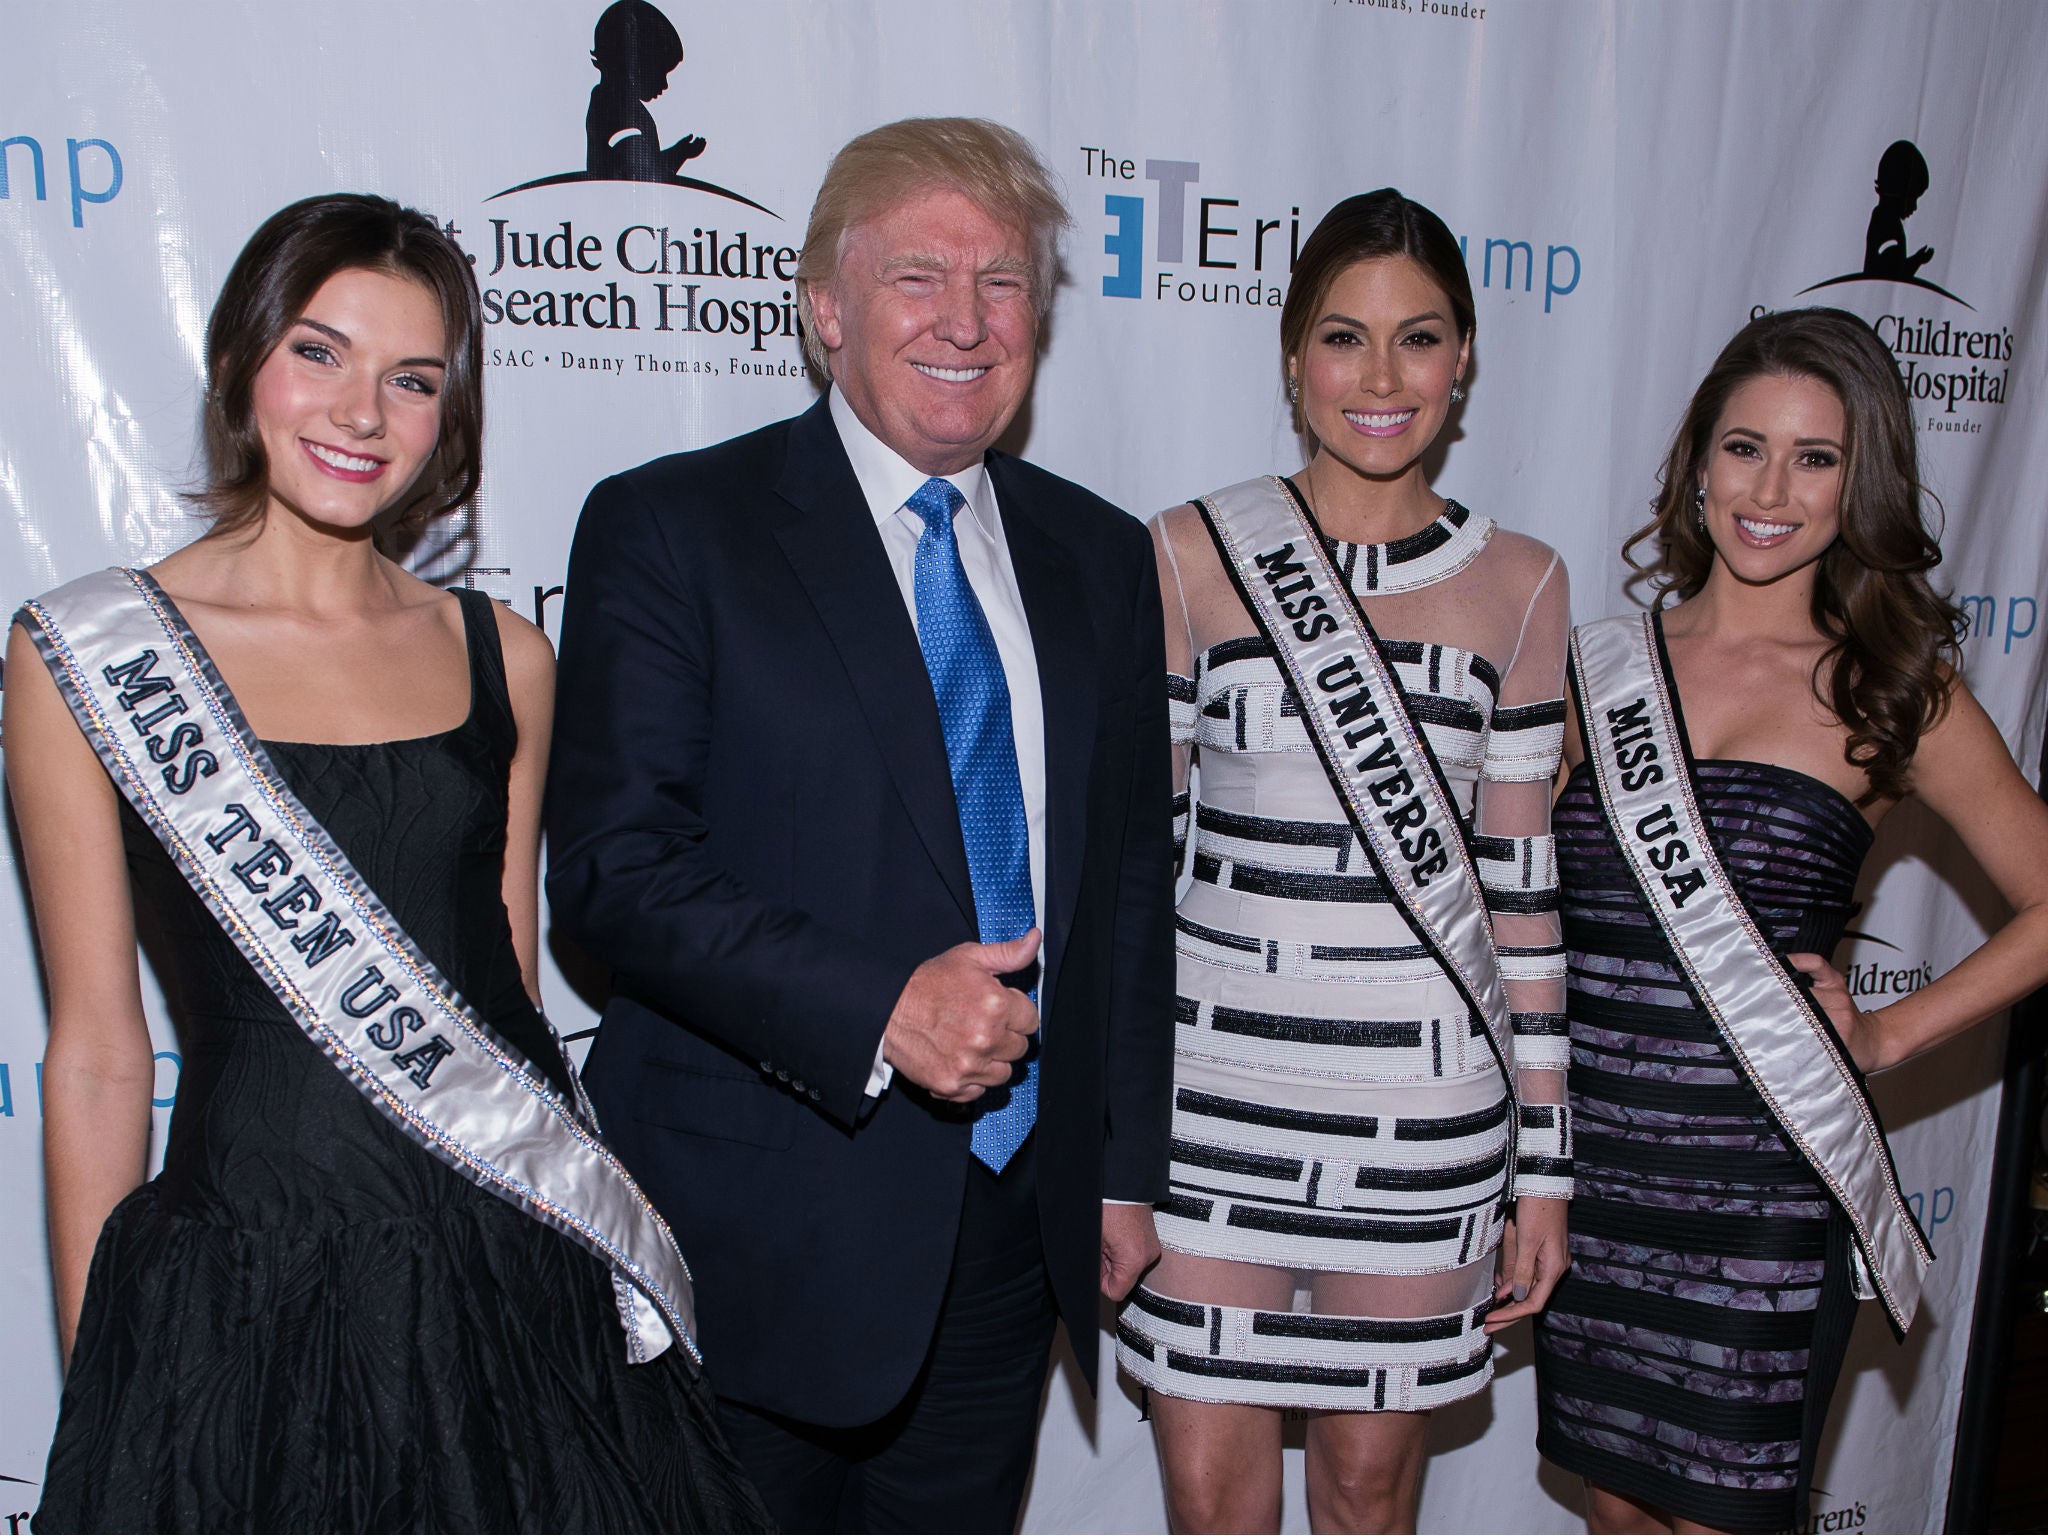 Donald Trump - seen here with beauty pageant contestants on September 15, 2014 in Briarcliff Manor, New York - was allegedly offered women when he was in Moscow promoting Miss Universe, a separate pageant